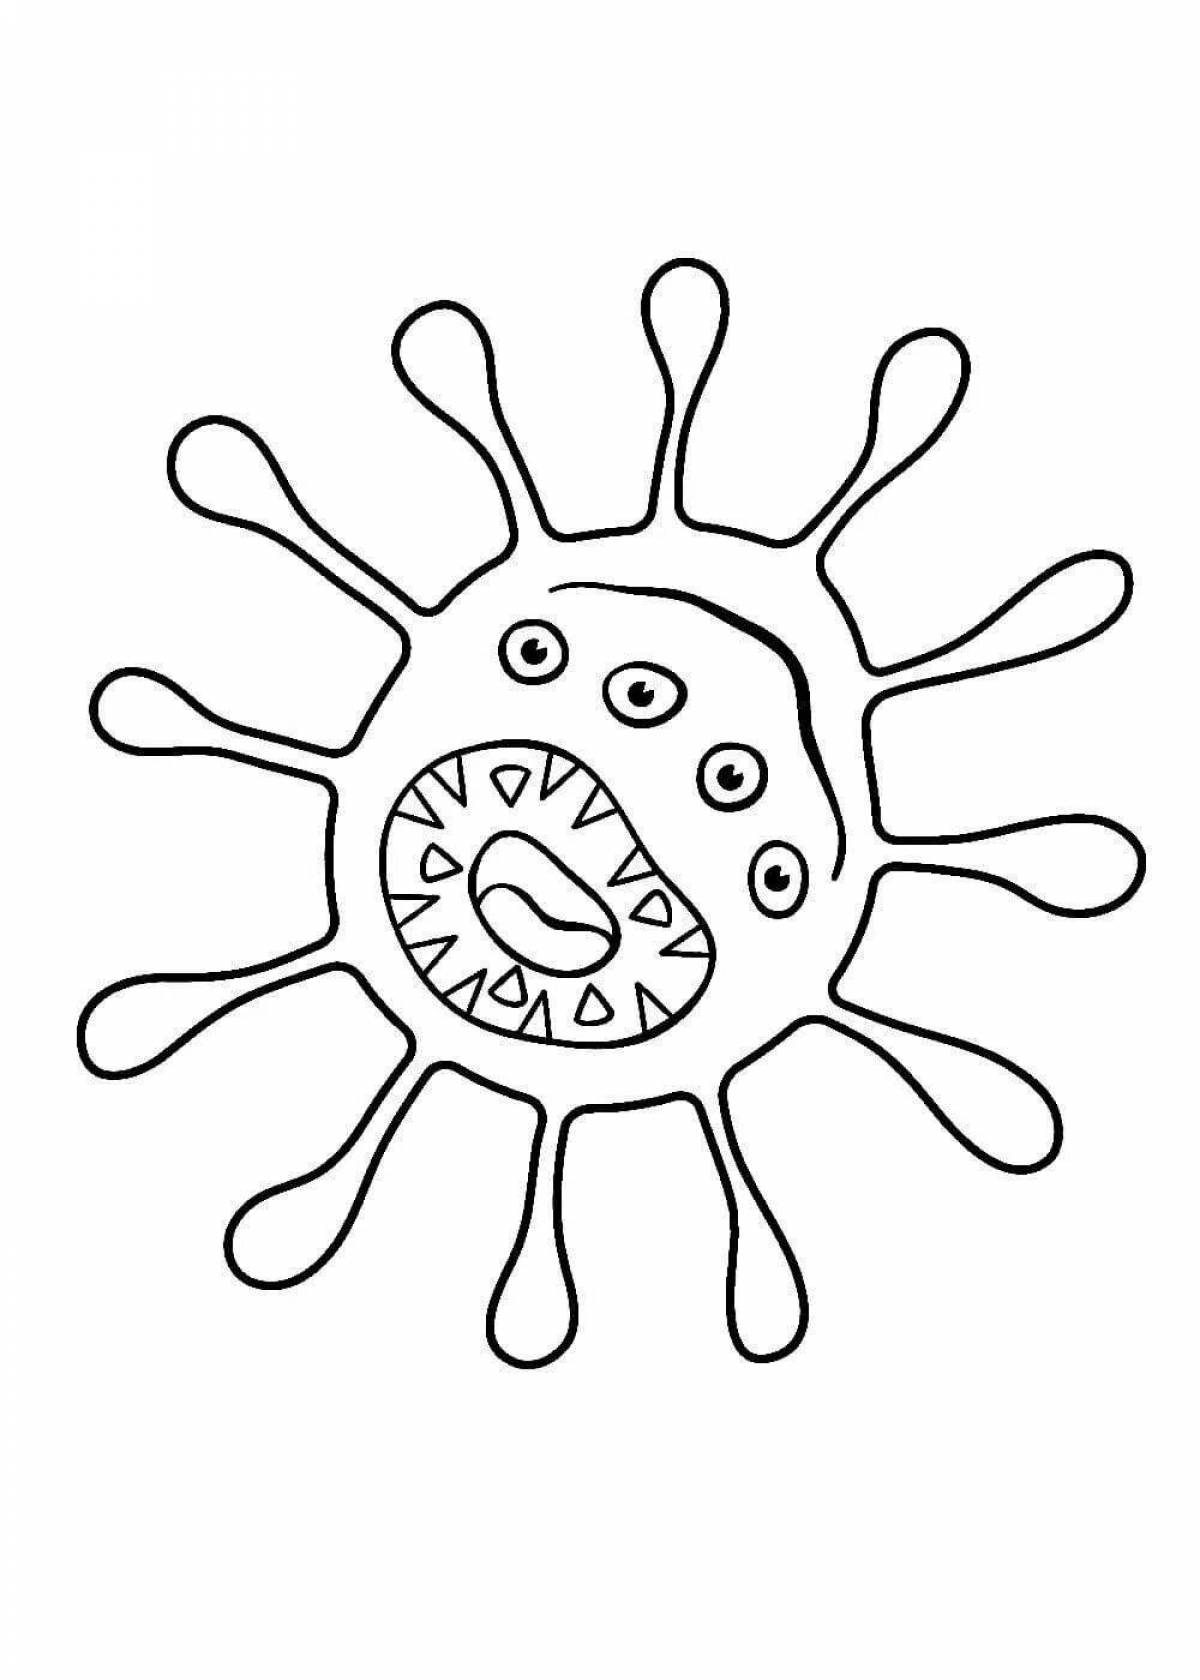 Colorful and fun coloring pages for viruses and microbes